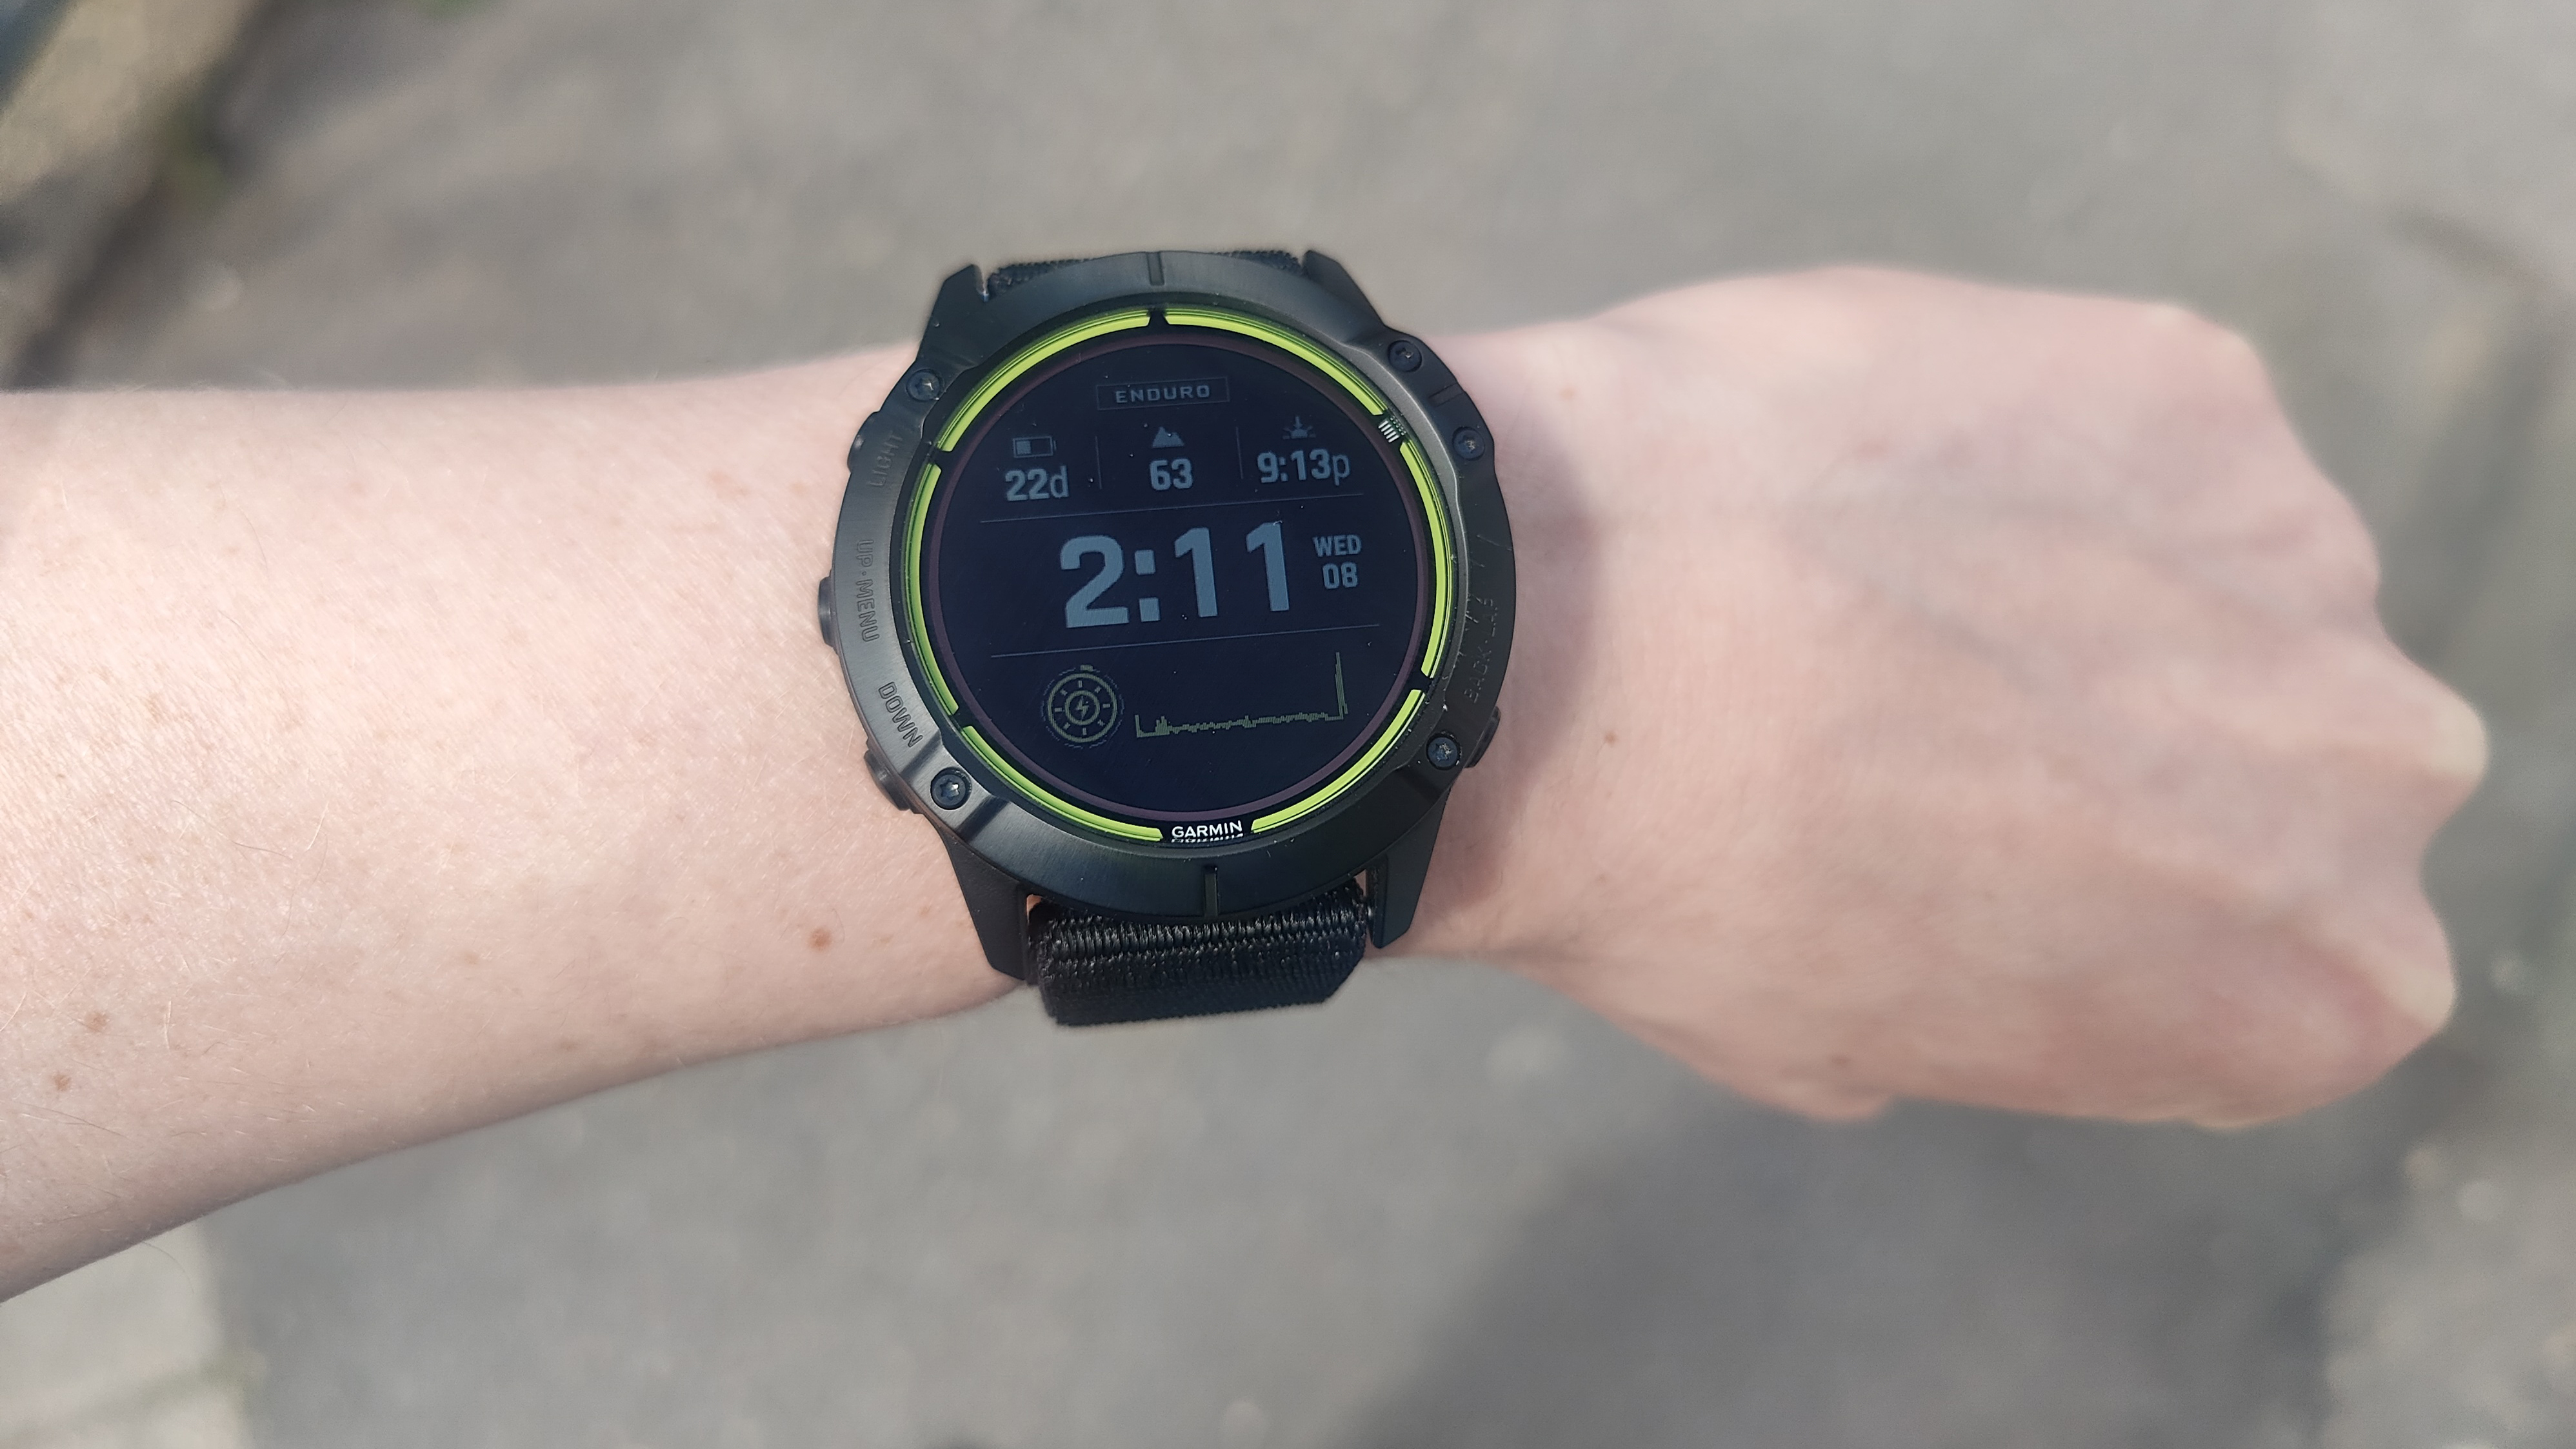 Serious about fitness? This Garmin is a near-perfect sports watch